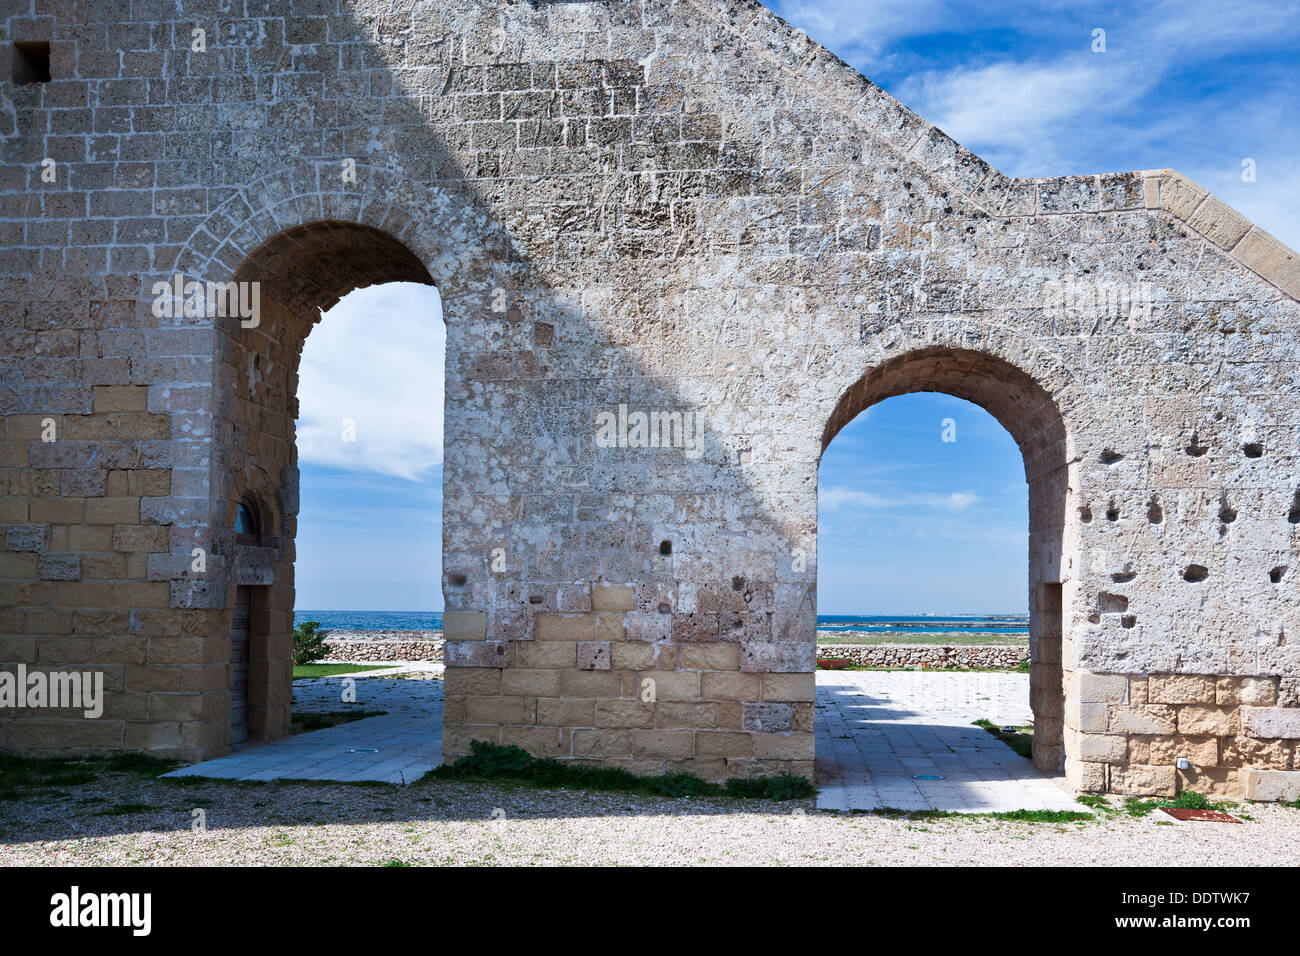 Detail view of Torre Lapillo, 16th century tower coastline defense, with coastline framed by arched stairway leading to square s Stock Photo